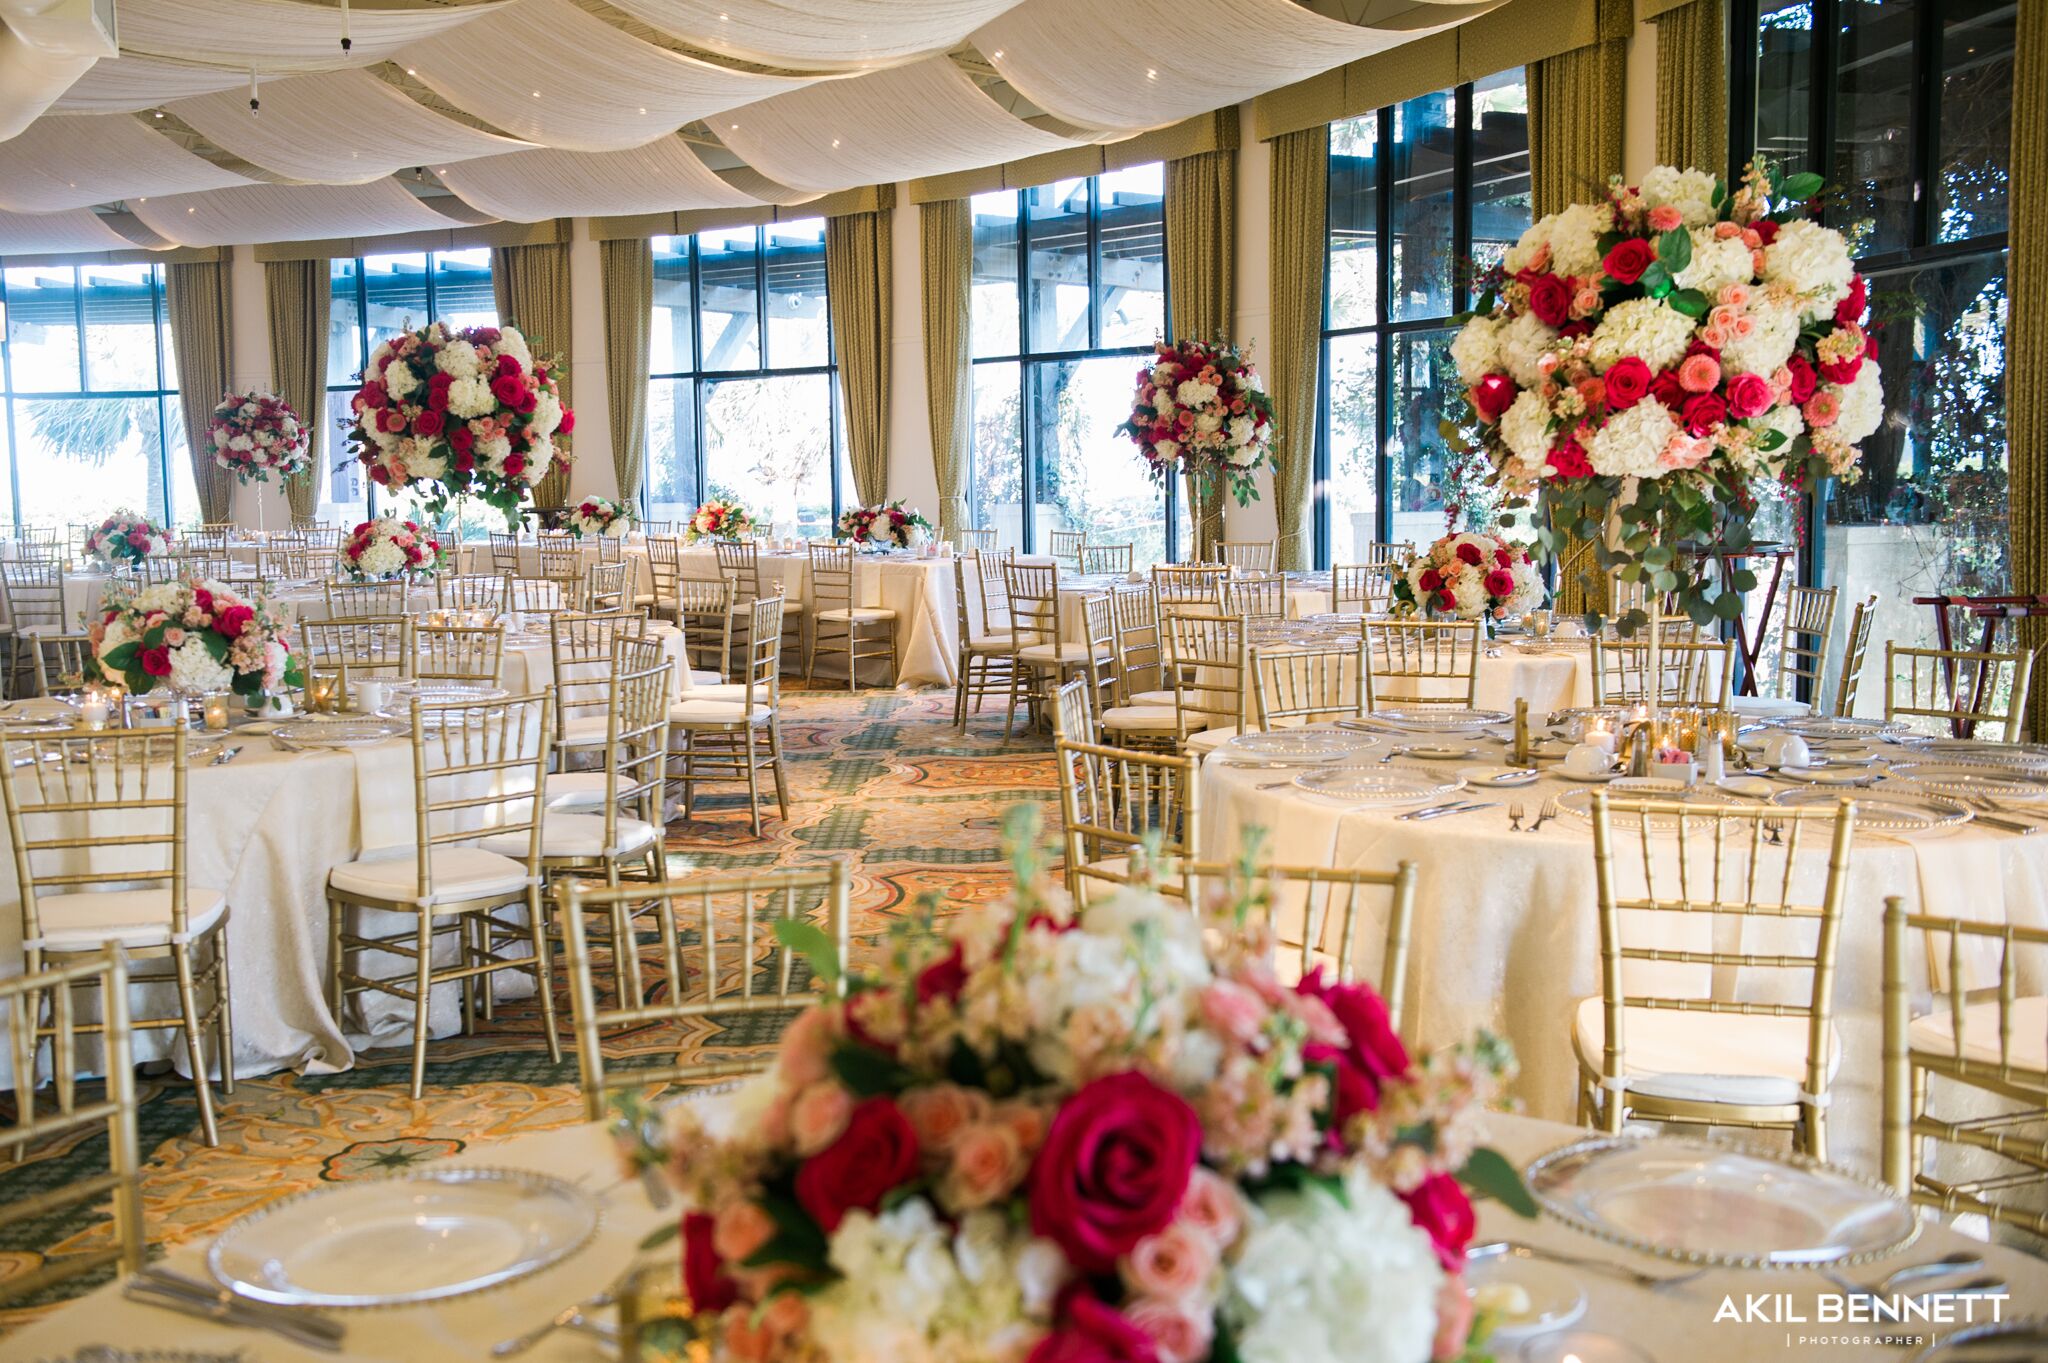 Event Space for Weddings – Hotel Galvez & Spa